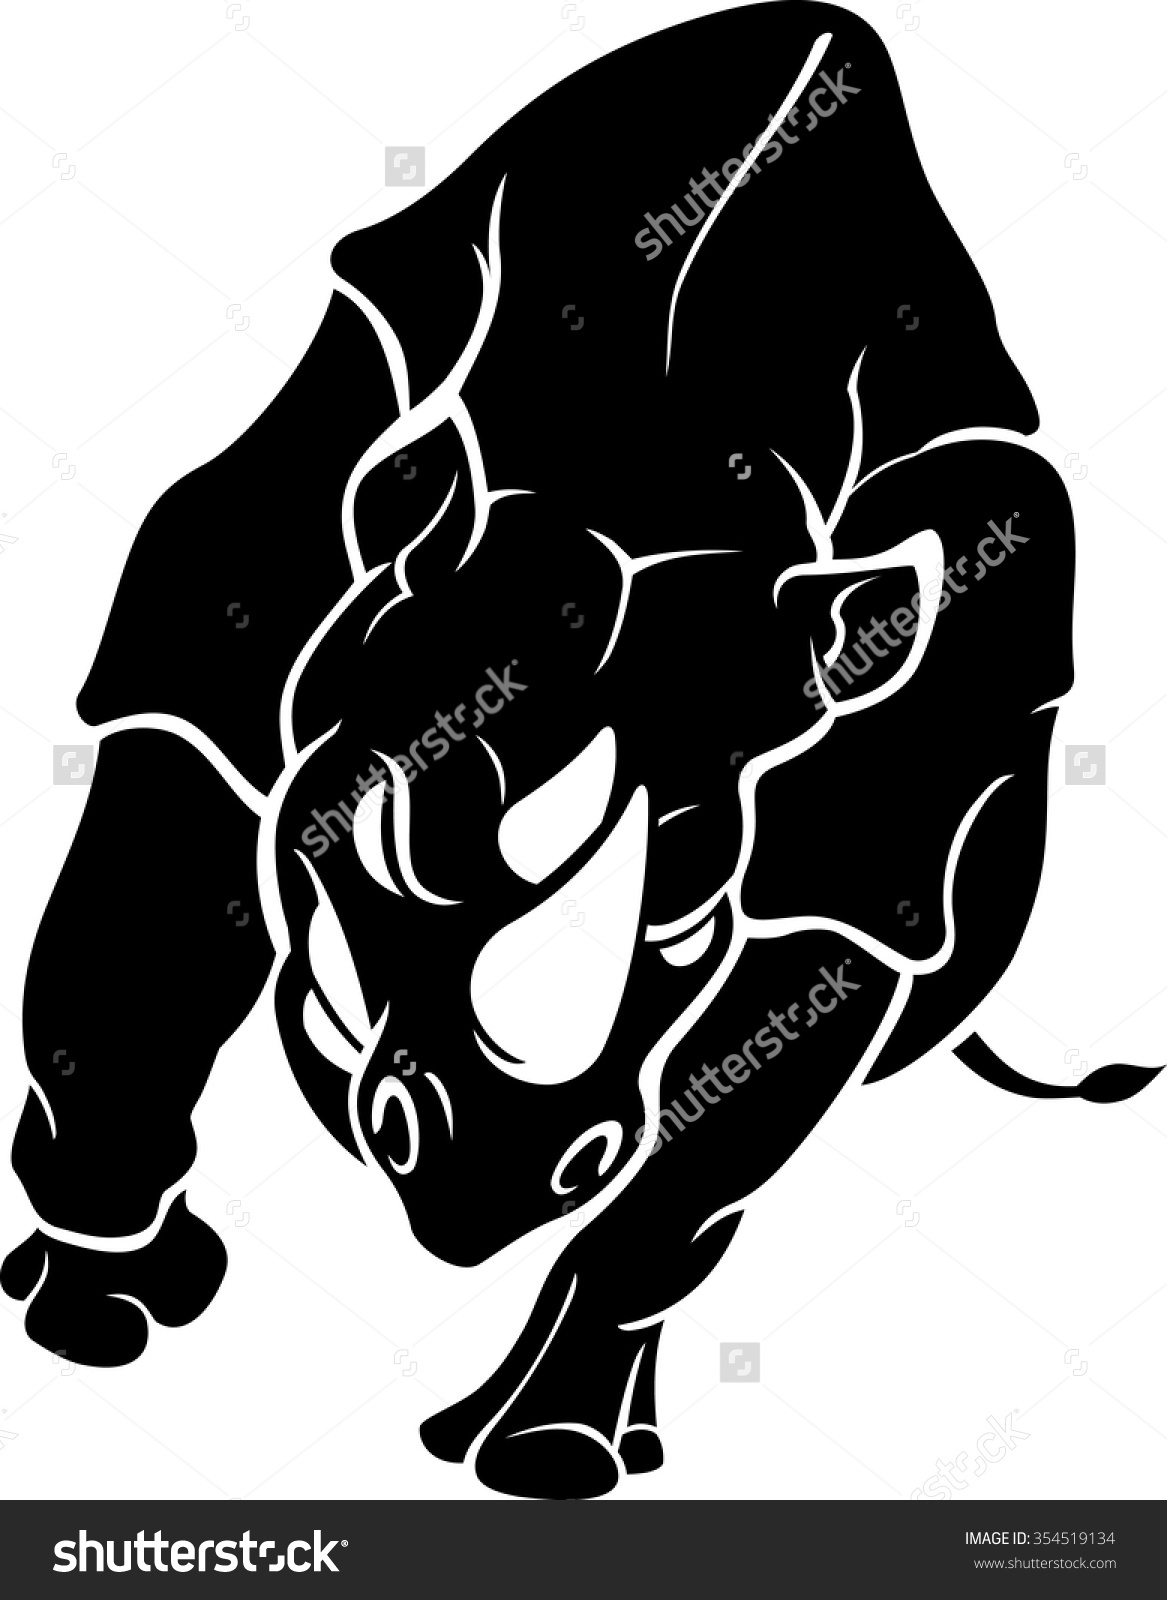 Charging Rhino clipart #2, Download drawings